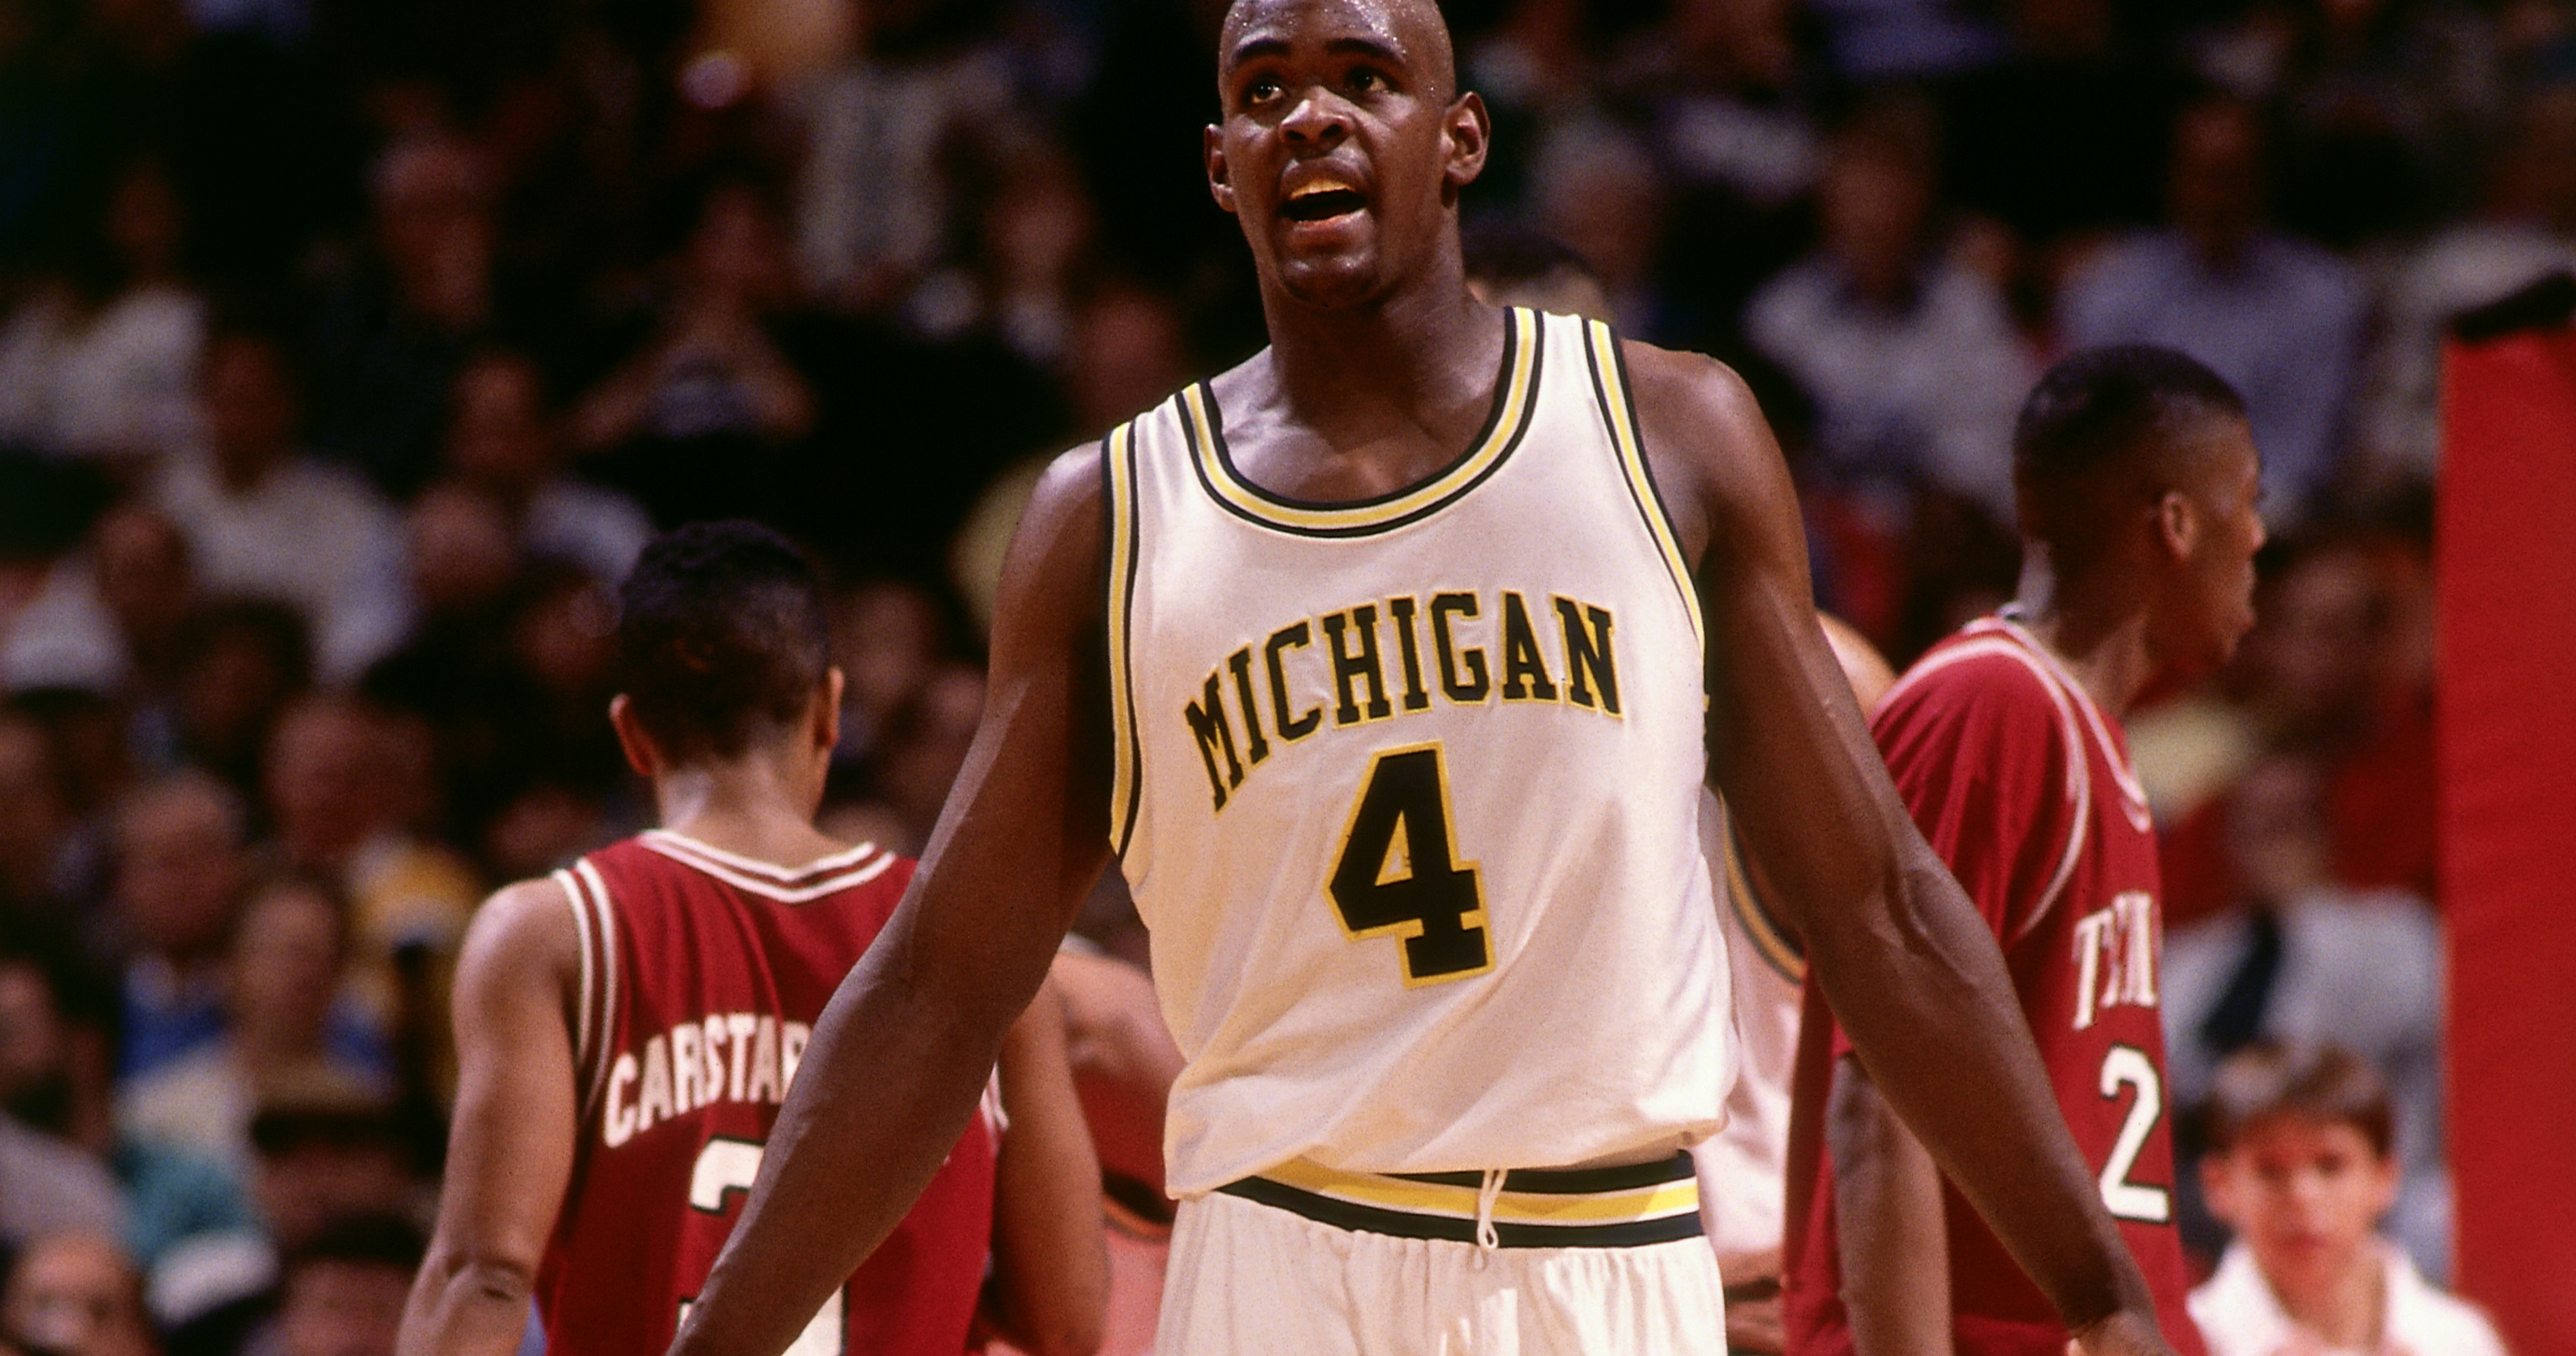 30 Years Since the Michigan Fab Five Era, Student-Athletes are Now